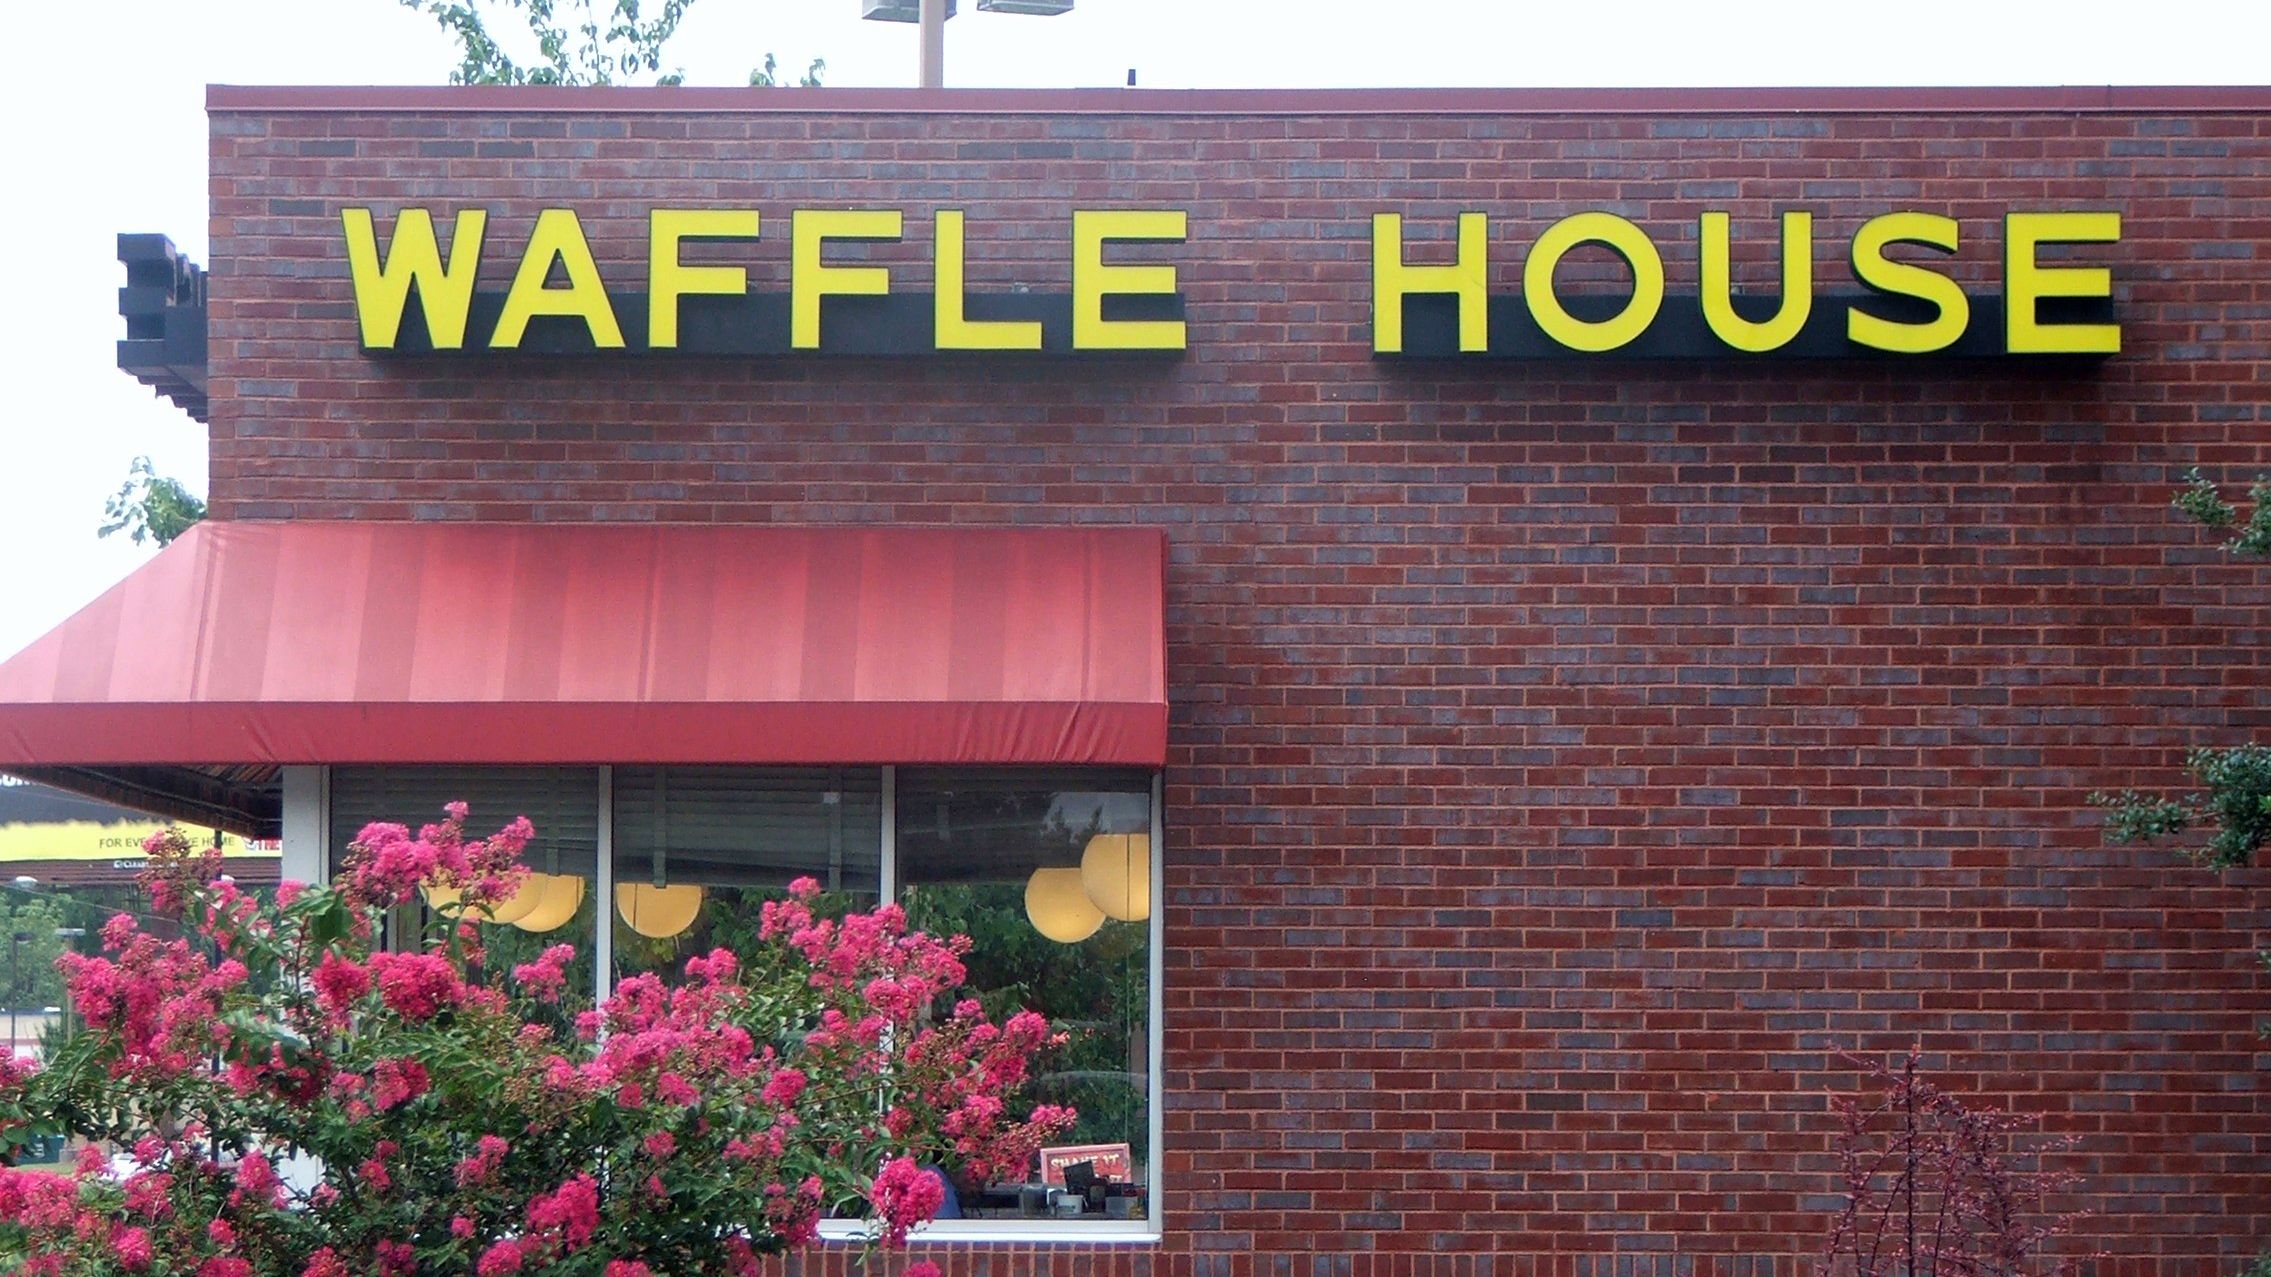 The Georgia-based Waffle House chain has more than 1,500 restaurants open 24 hours a day, year-round.